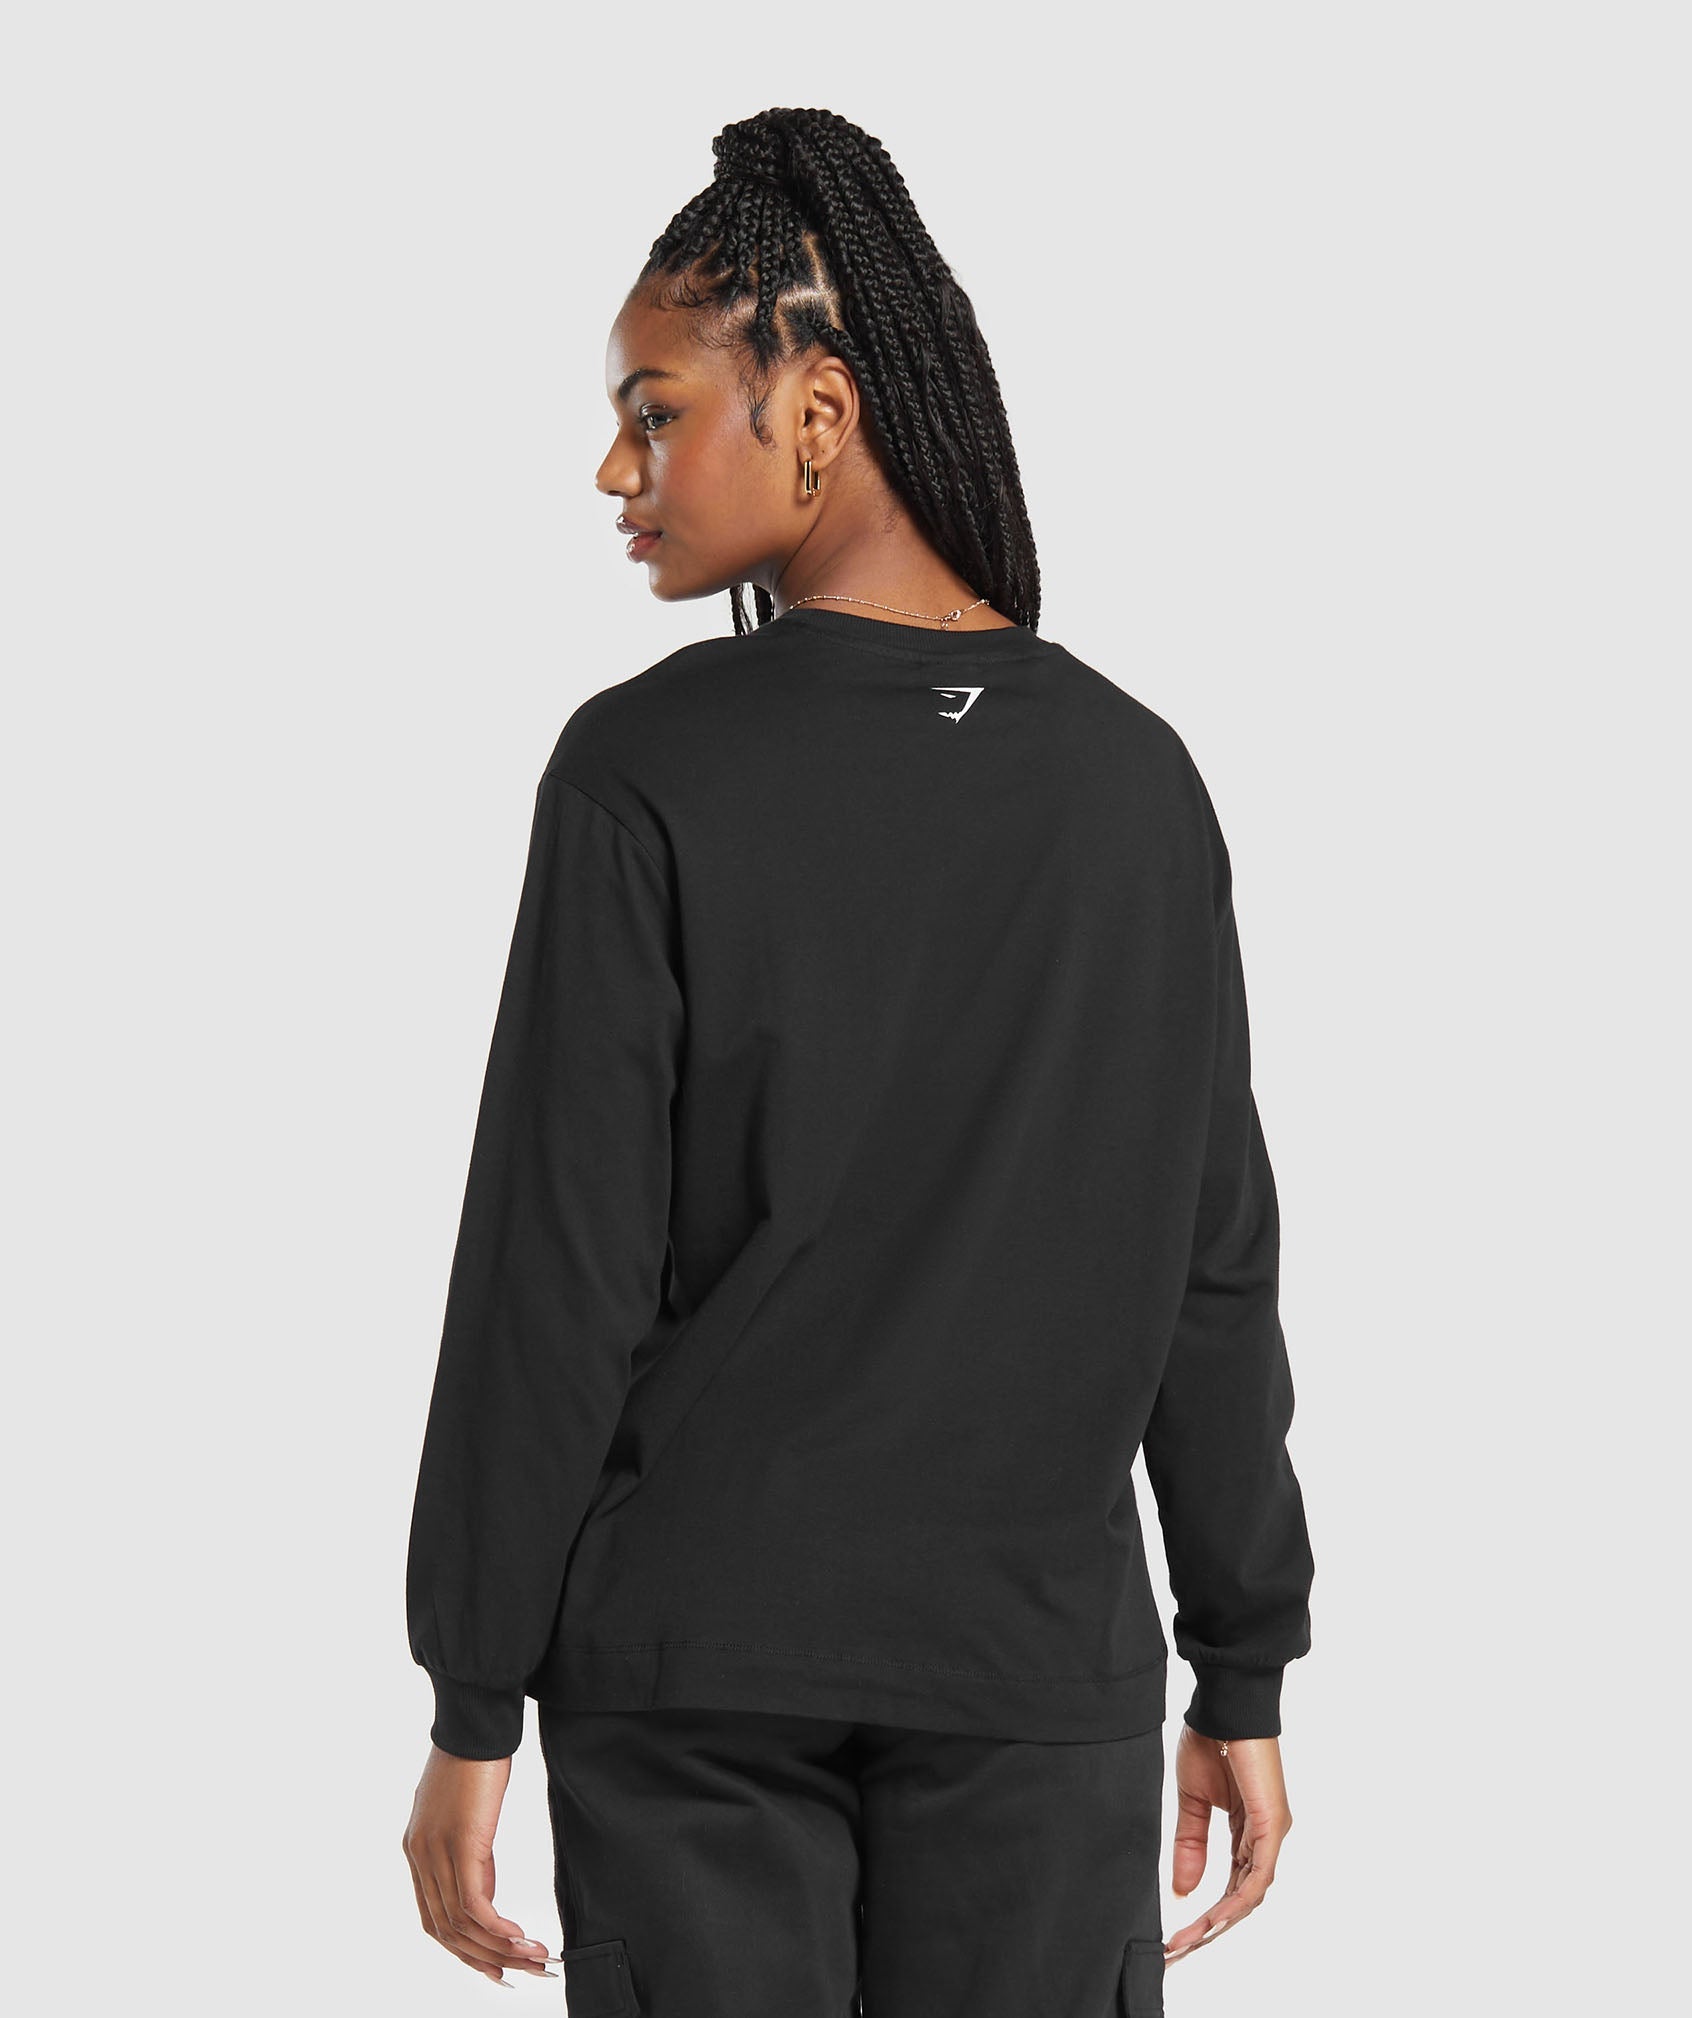 Its Giving Gym Long Sleeve Top in Black - view 2